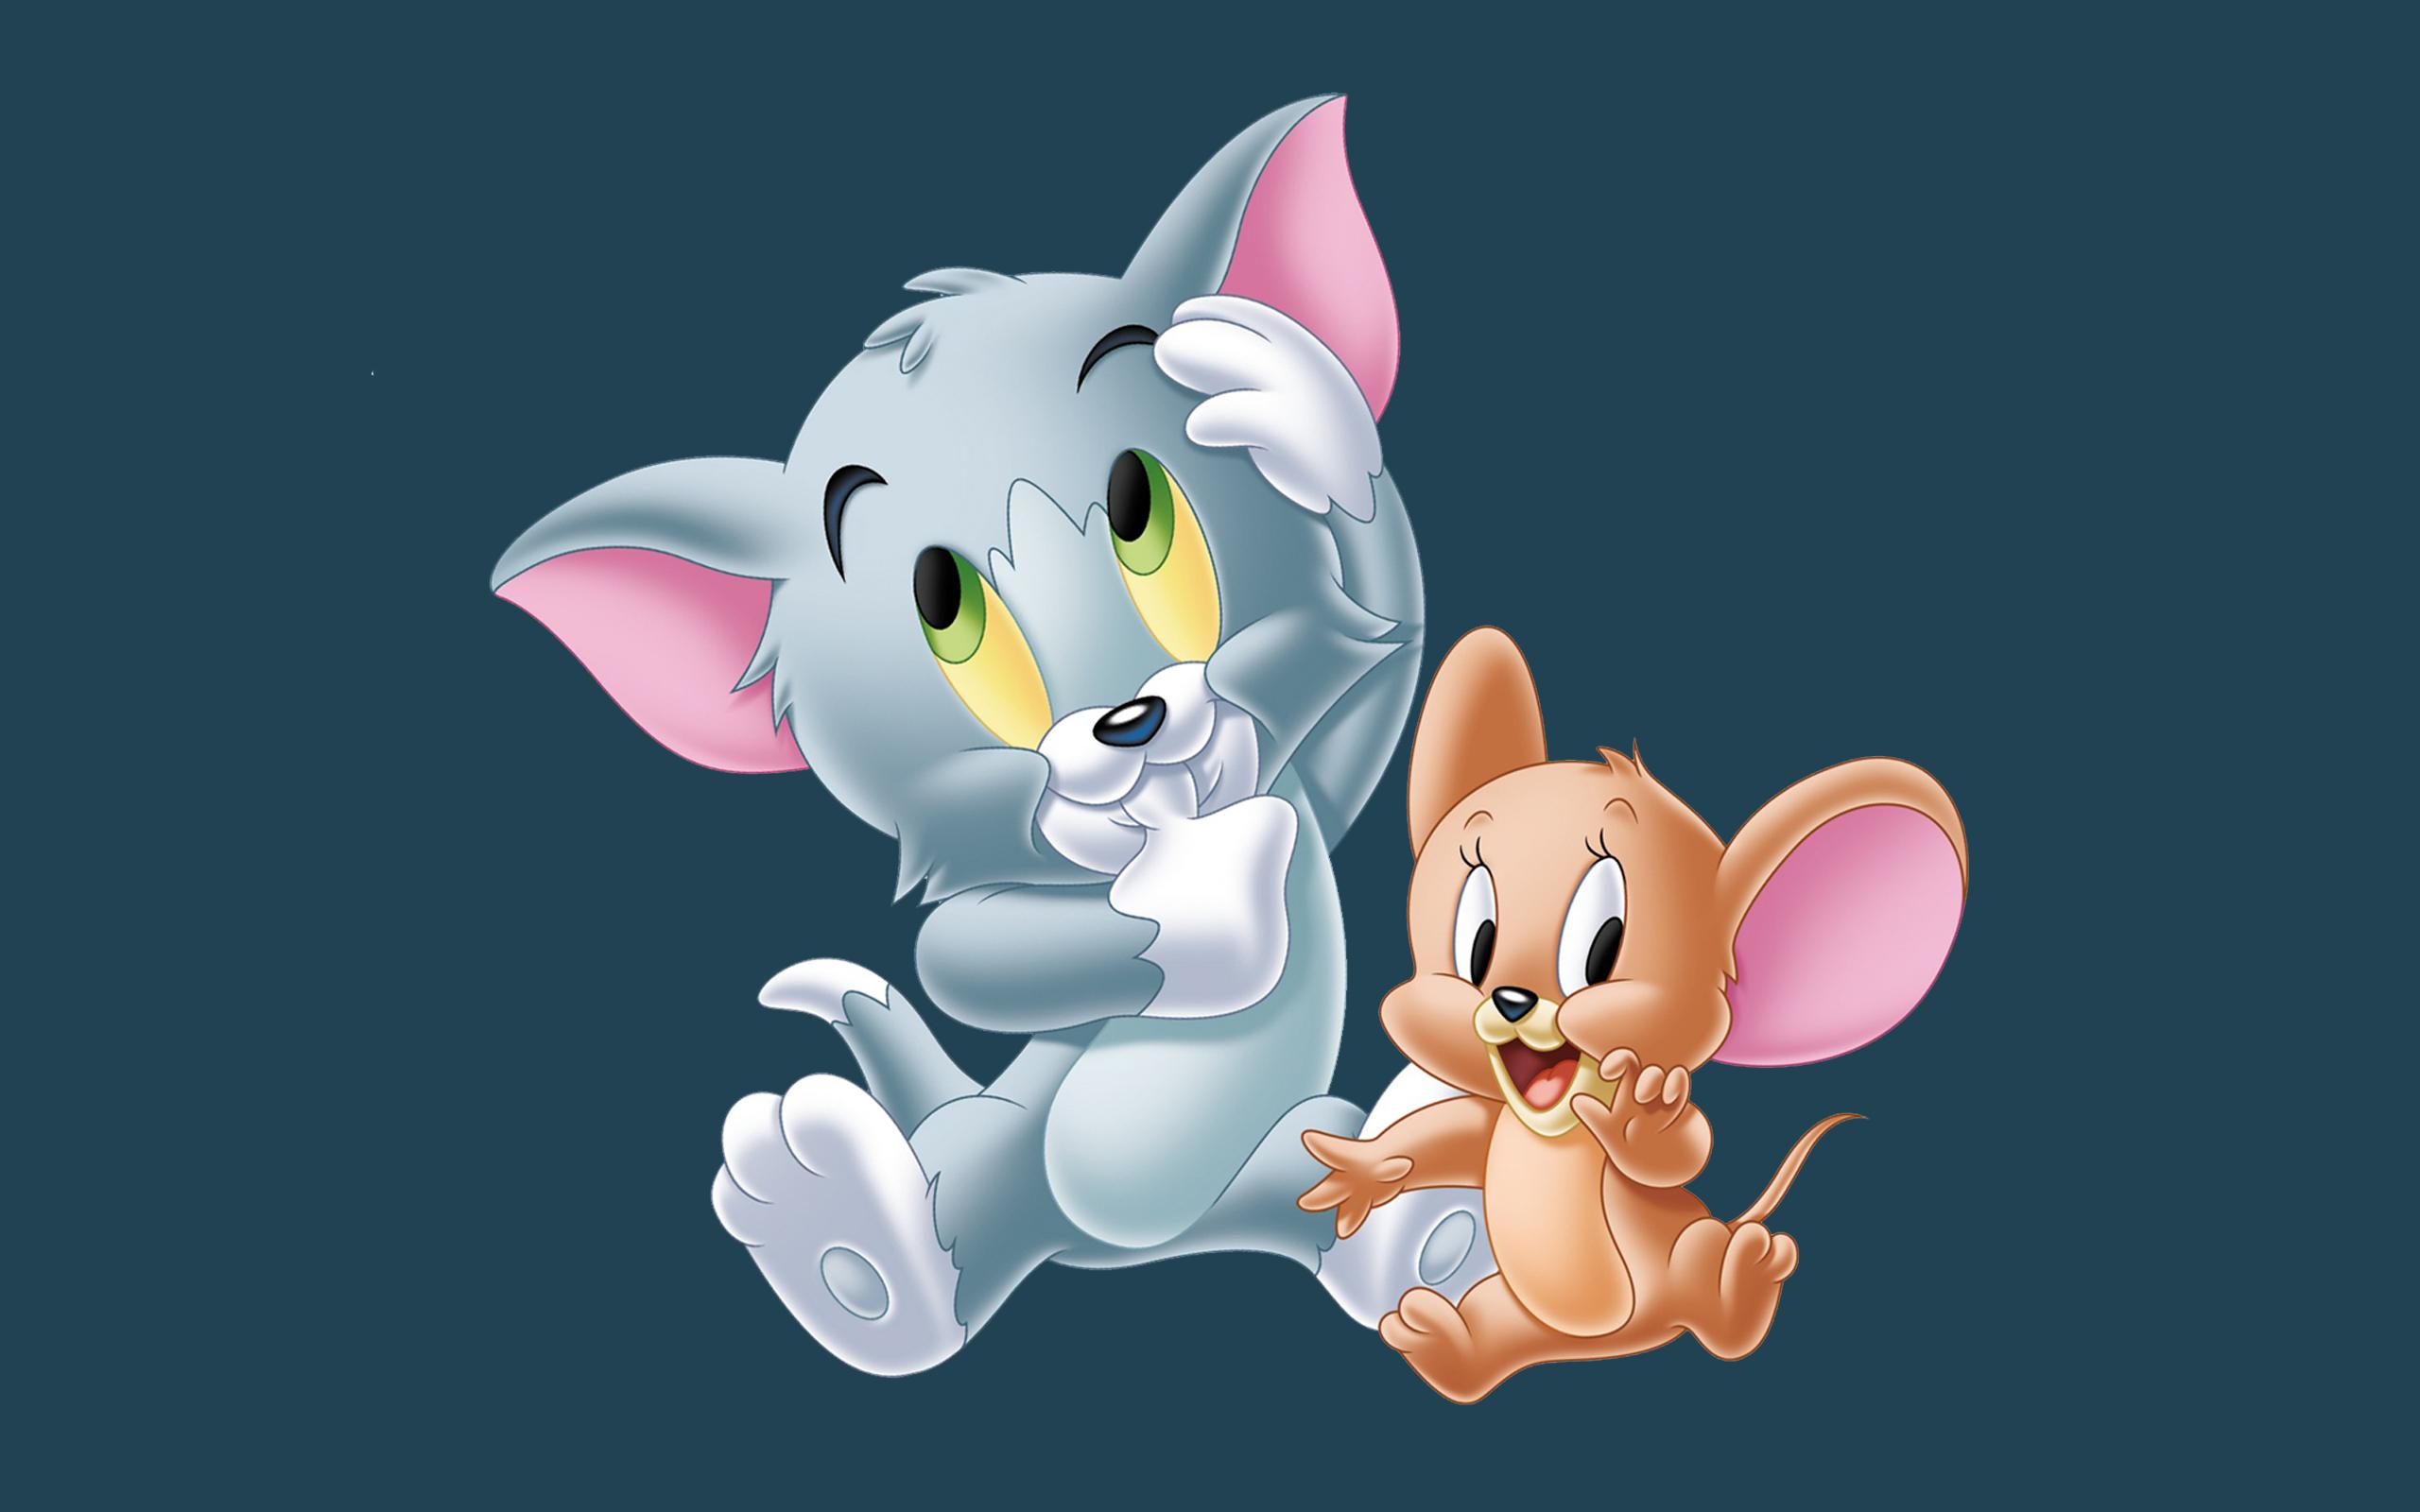 Tom And Jerry As Small Babies Desktop HD Wallpaper For Mobile Phones Tablet And Pc 2560x1600, Wallpaper13.com